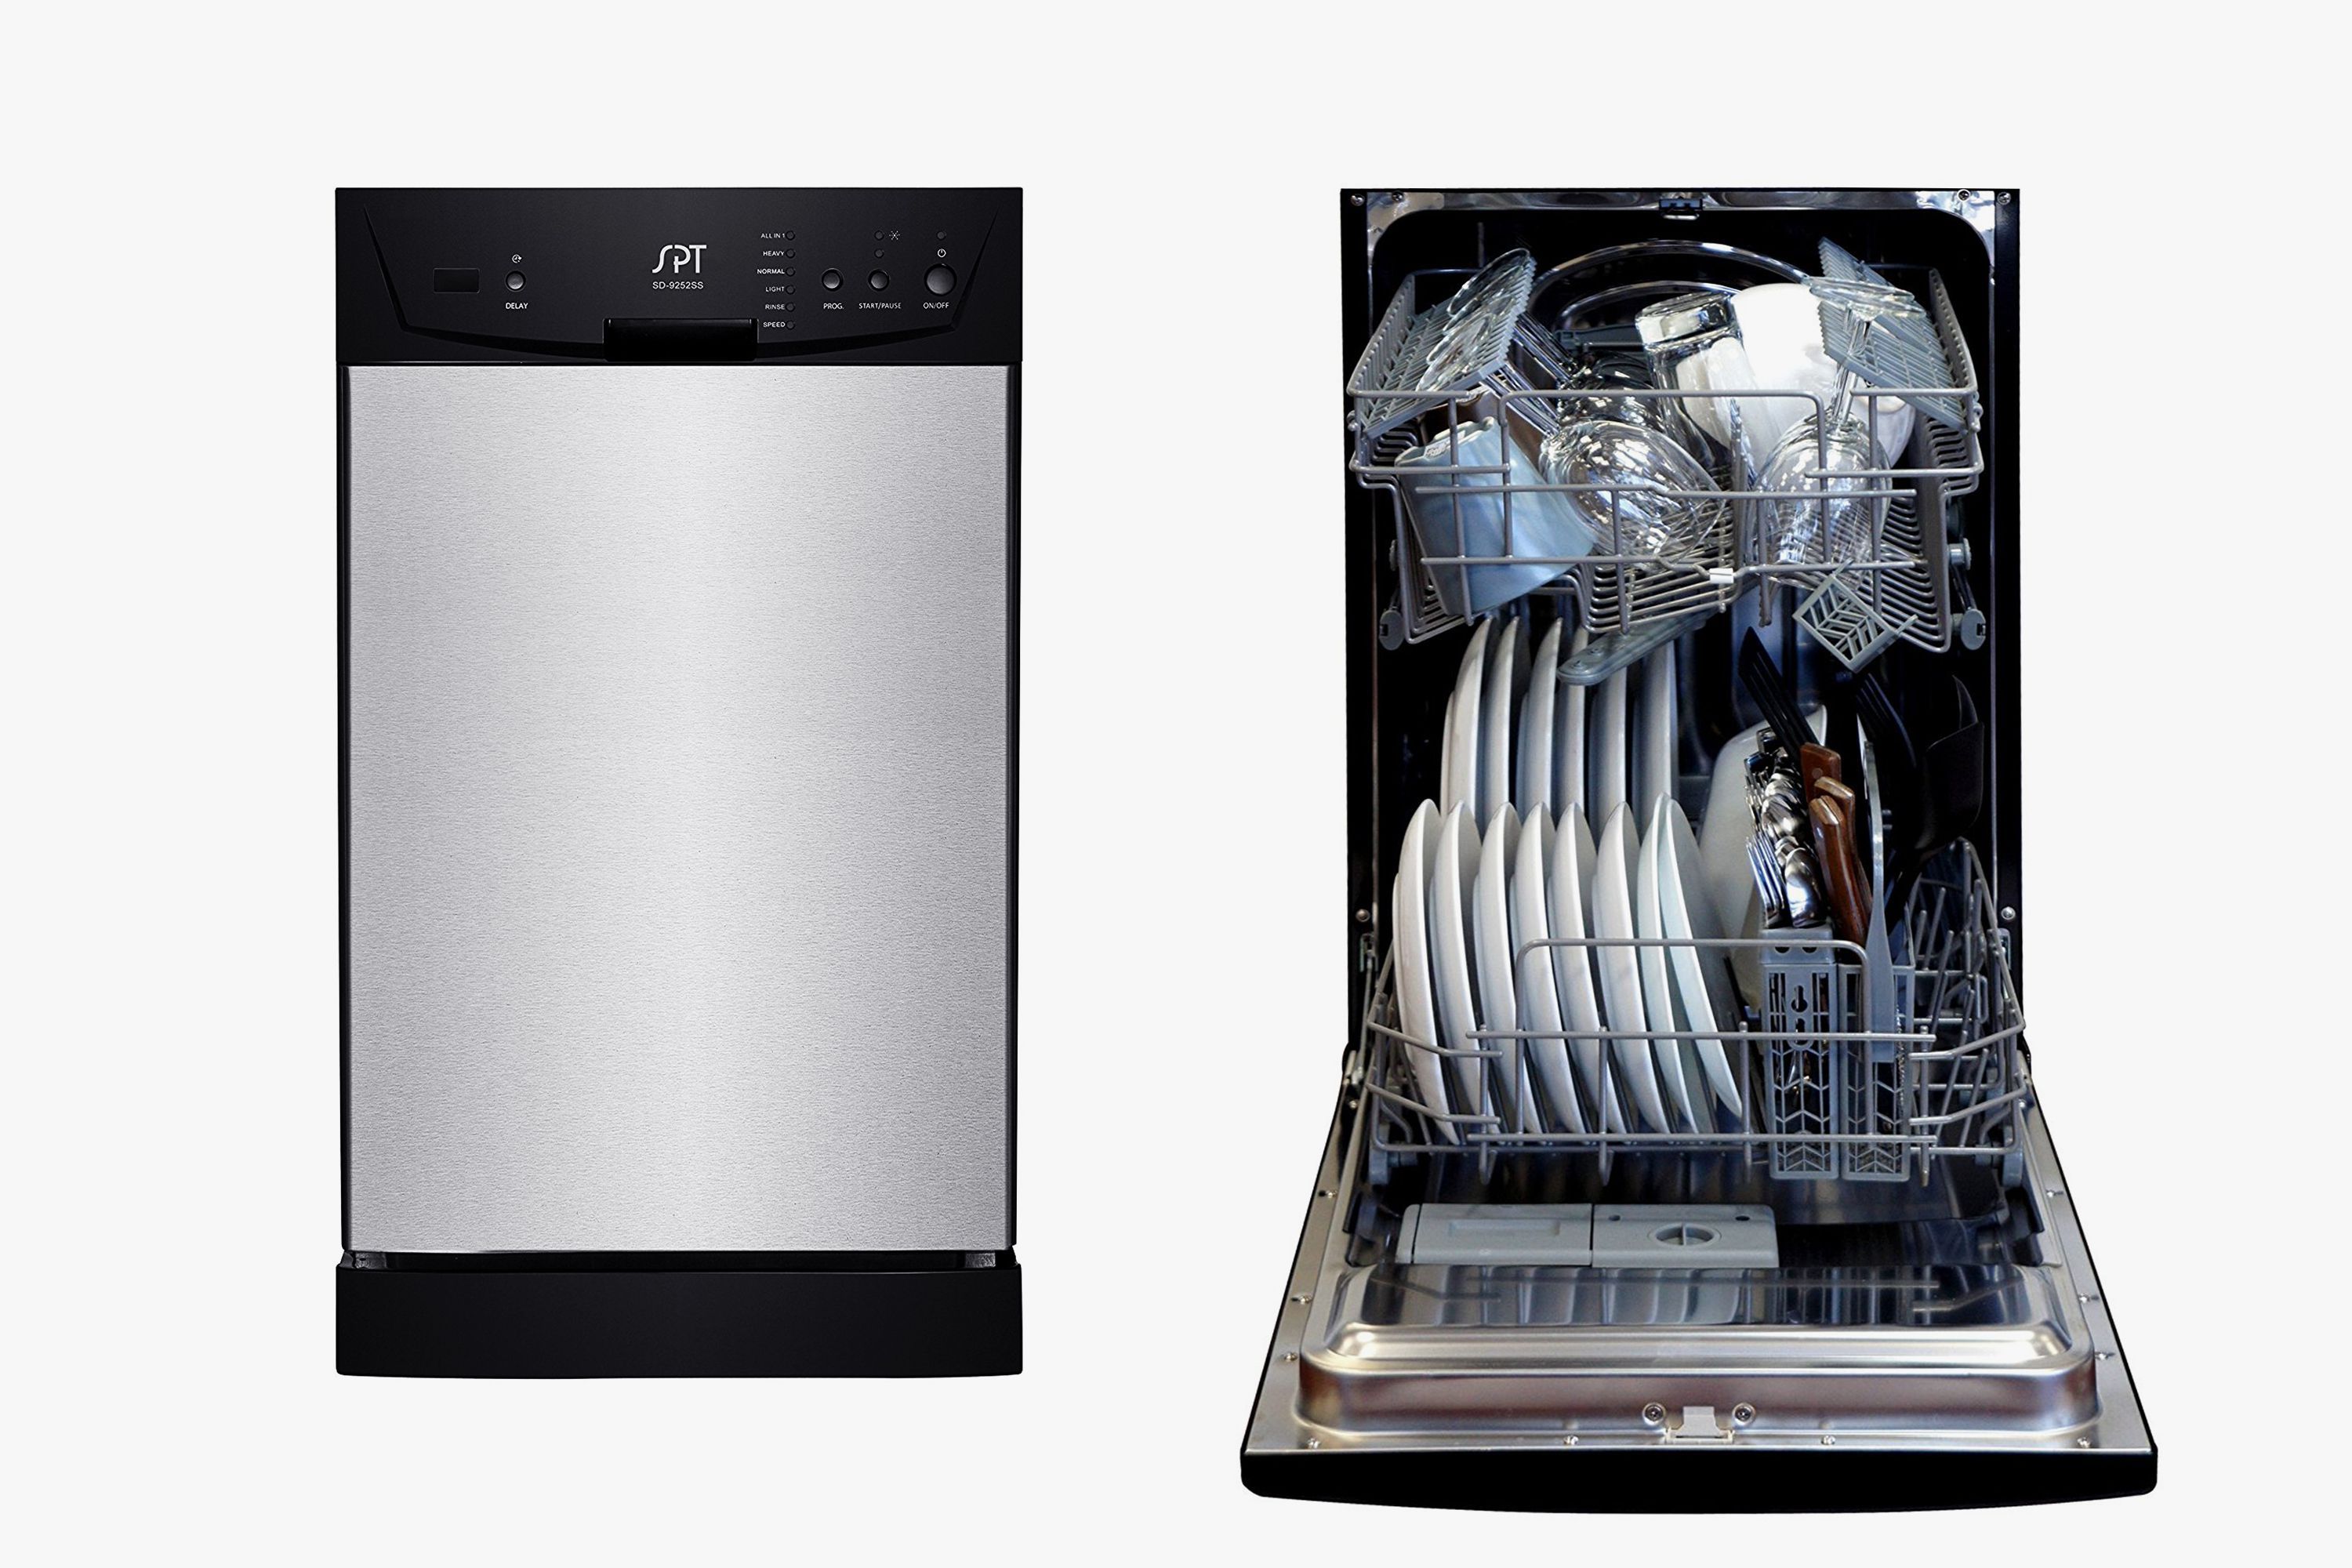 10-best-dishwashers-for-2019-top-rated-dishwasher-reviews-brands